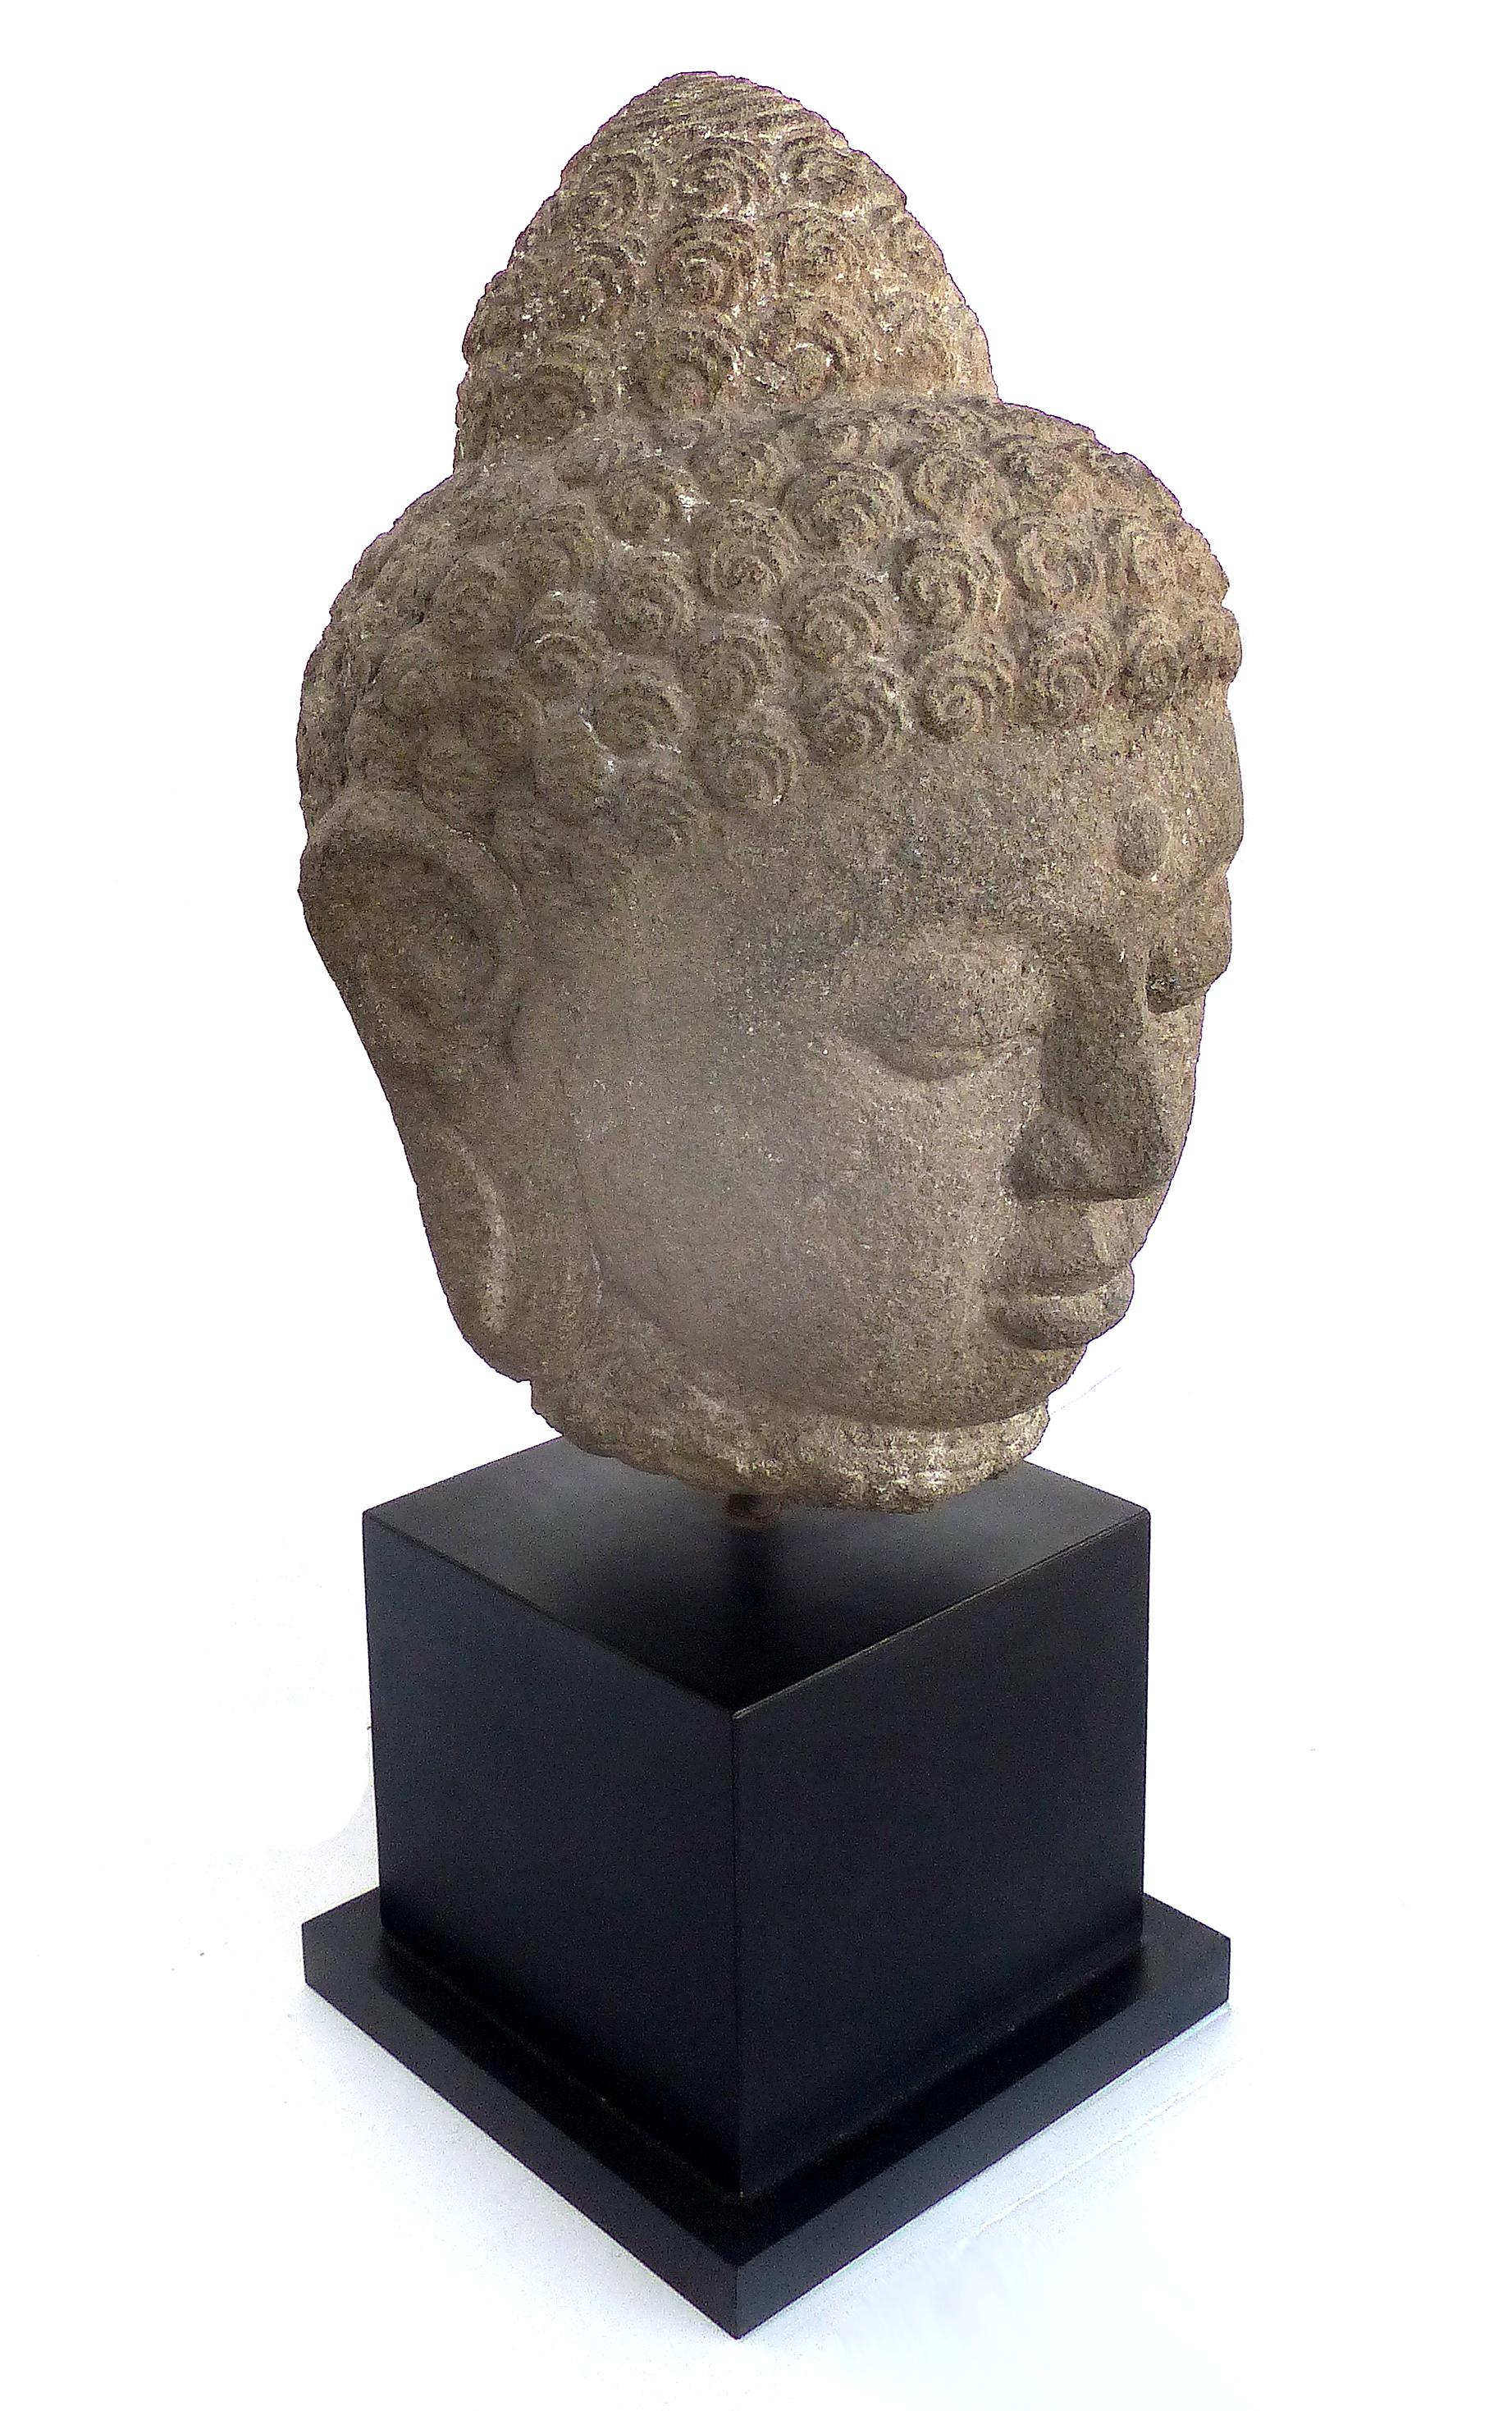 Ancient Carved Stone Buddha Head Sculpture, Provenance Royal-Athena Galleries NY

Offered for sale is an ancient carved stone Buddha head sculpture which was acquired at Royal-Athena Galleries, NY.  This ancient sculpture has been raised on a modern